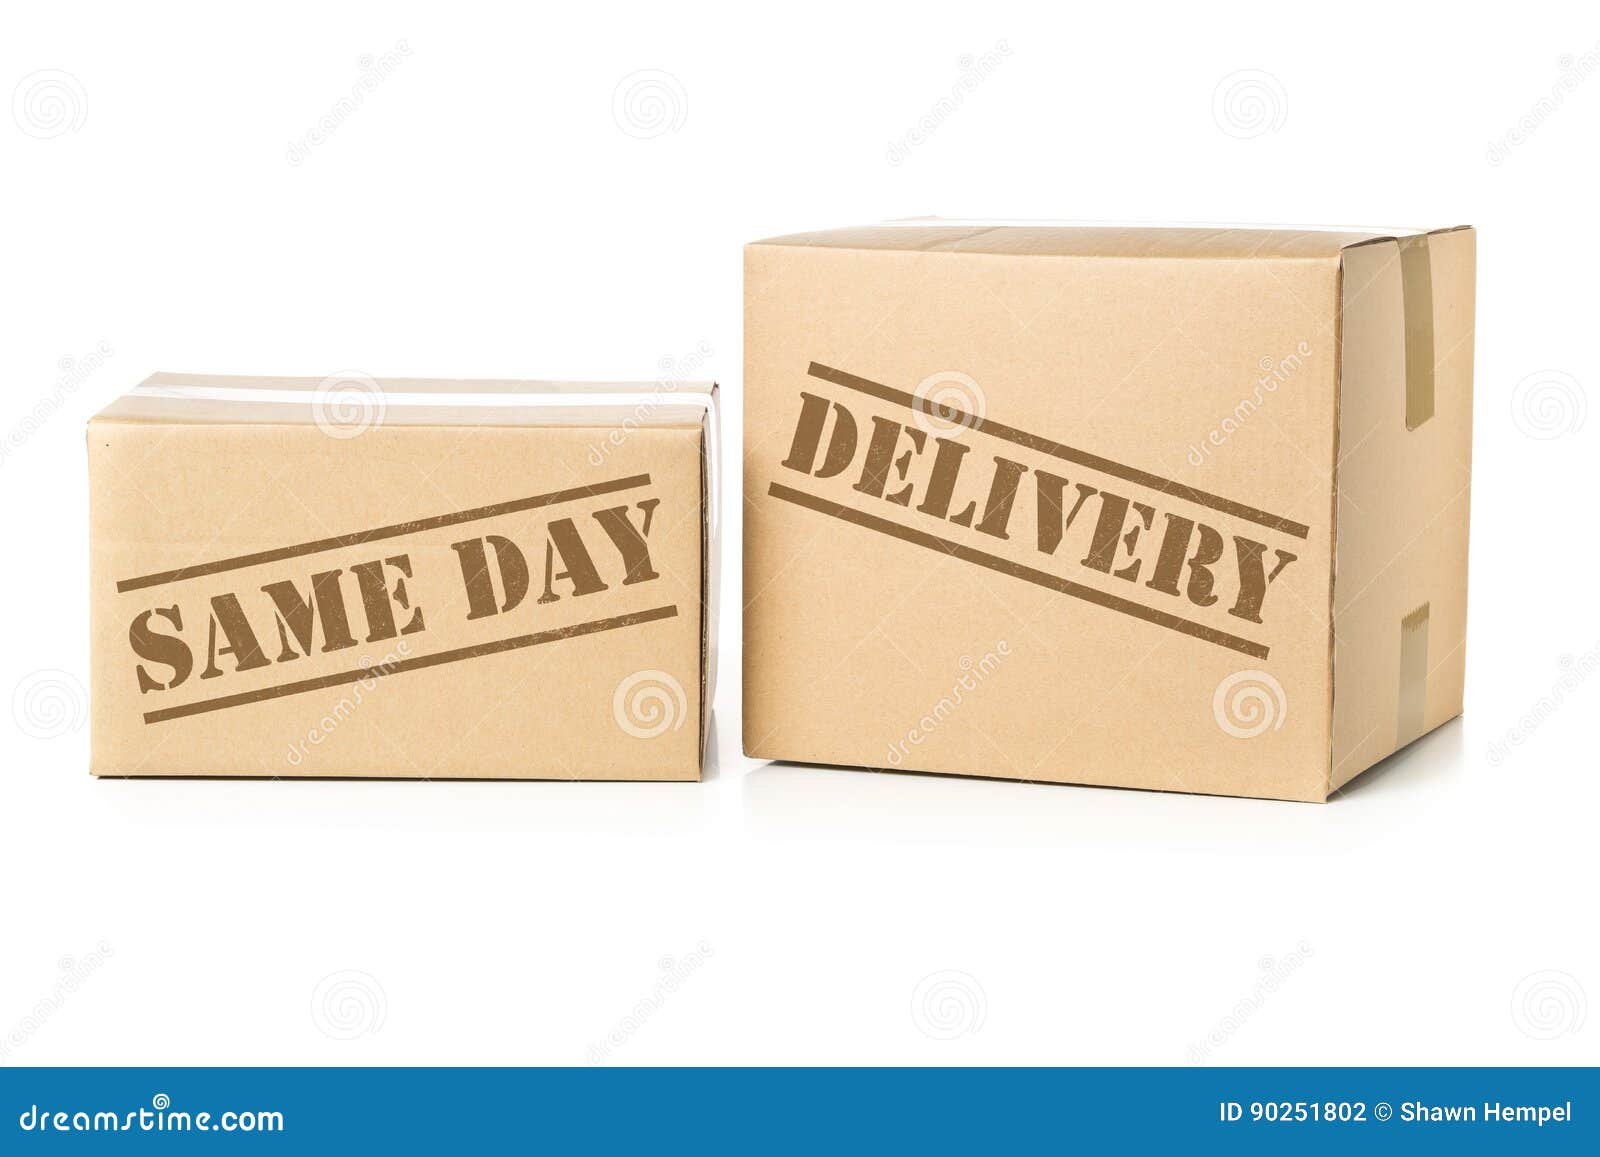 two carton parcels with same day delivery imprint